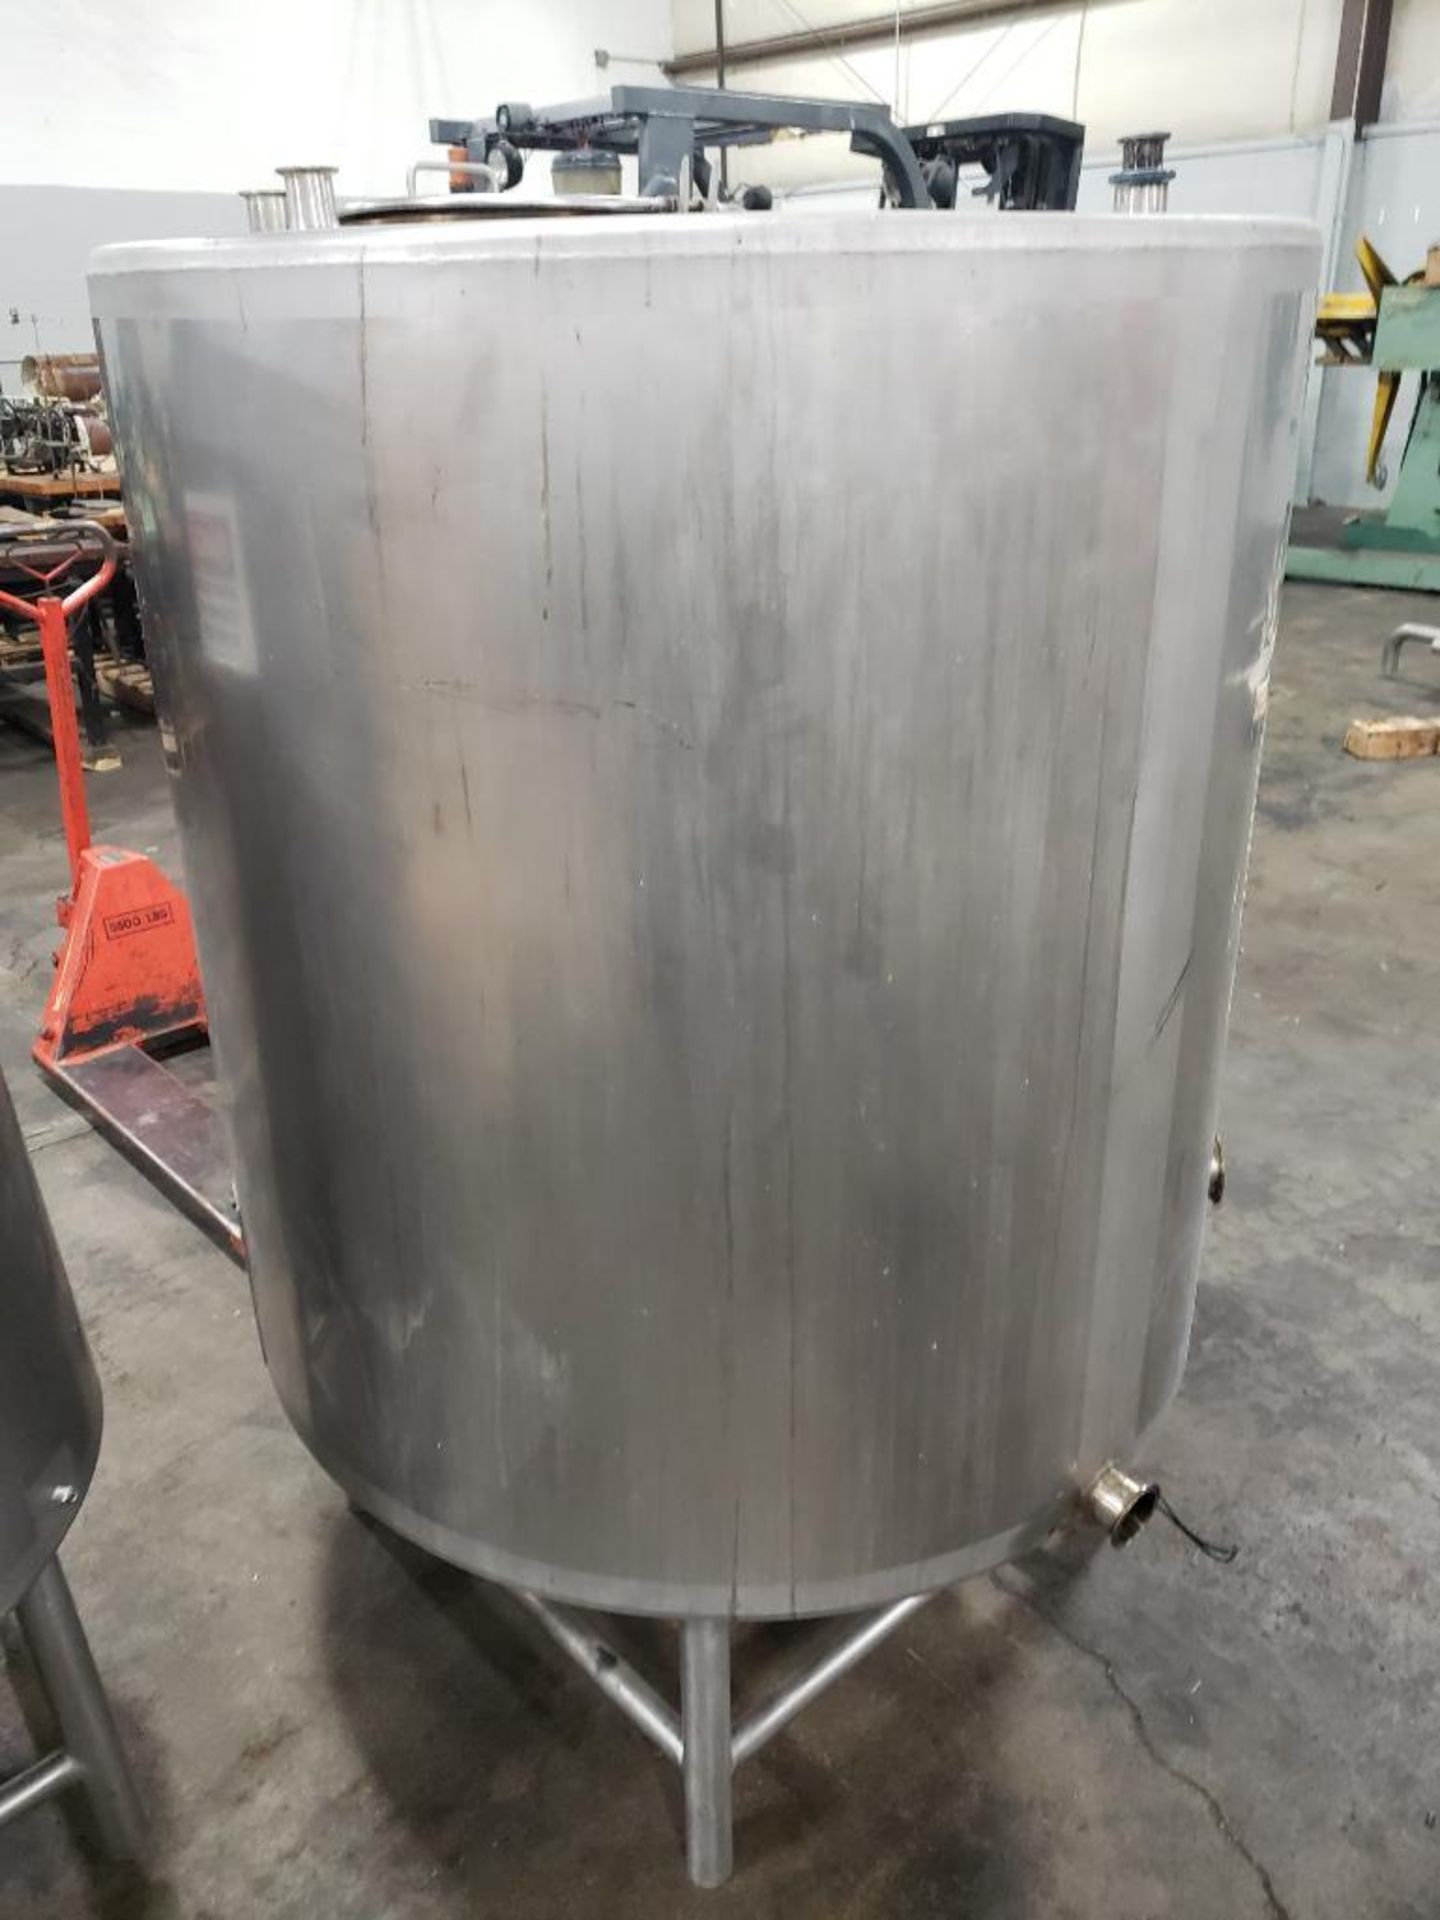 Approx 350 gallon Stainless steel holding tank. Approx dimensions 47in wide by 48in tall. - Image 12 of 12